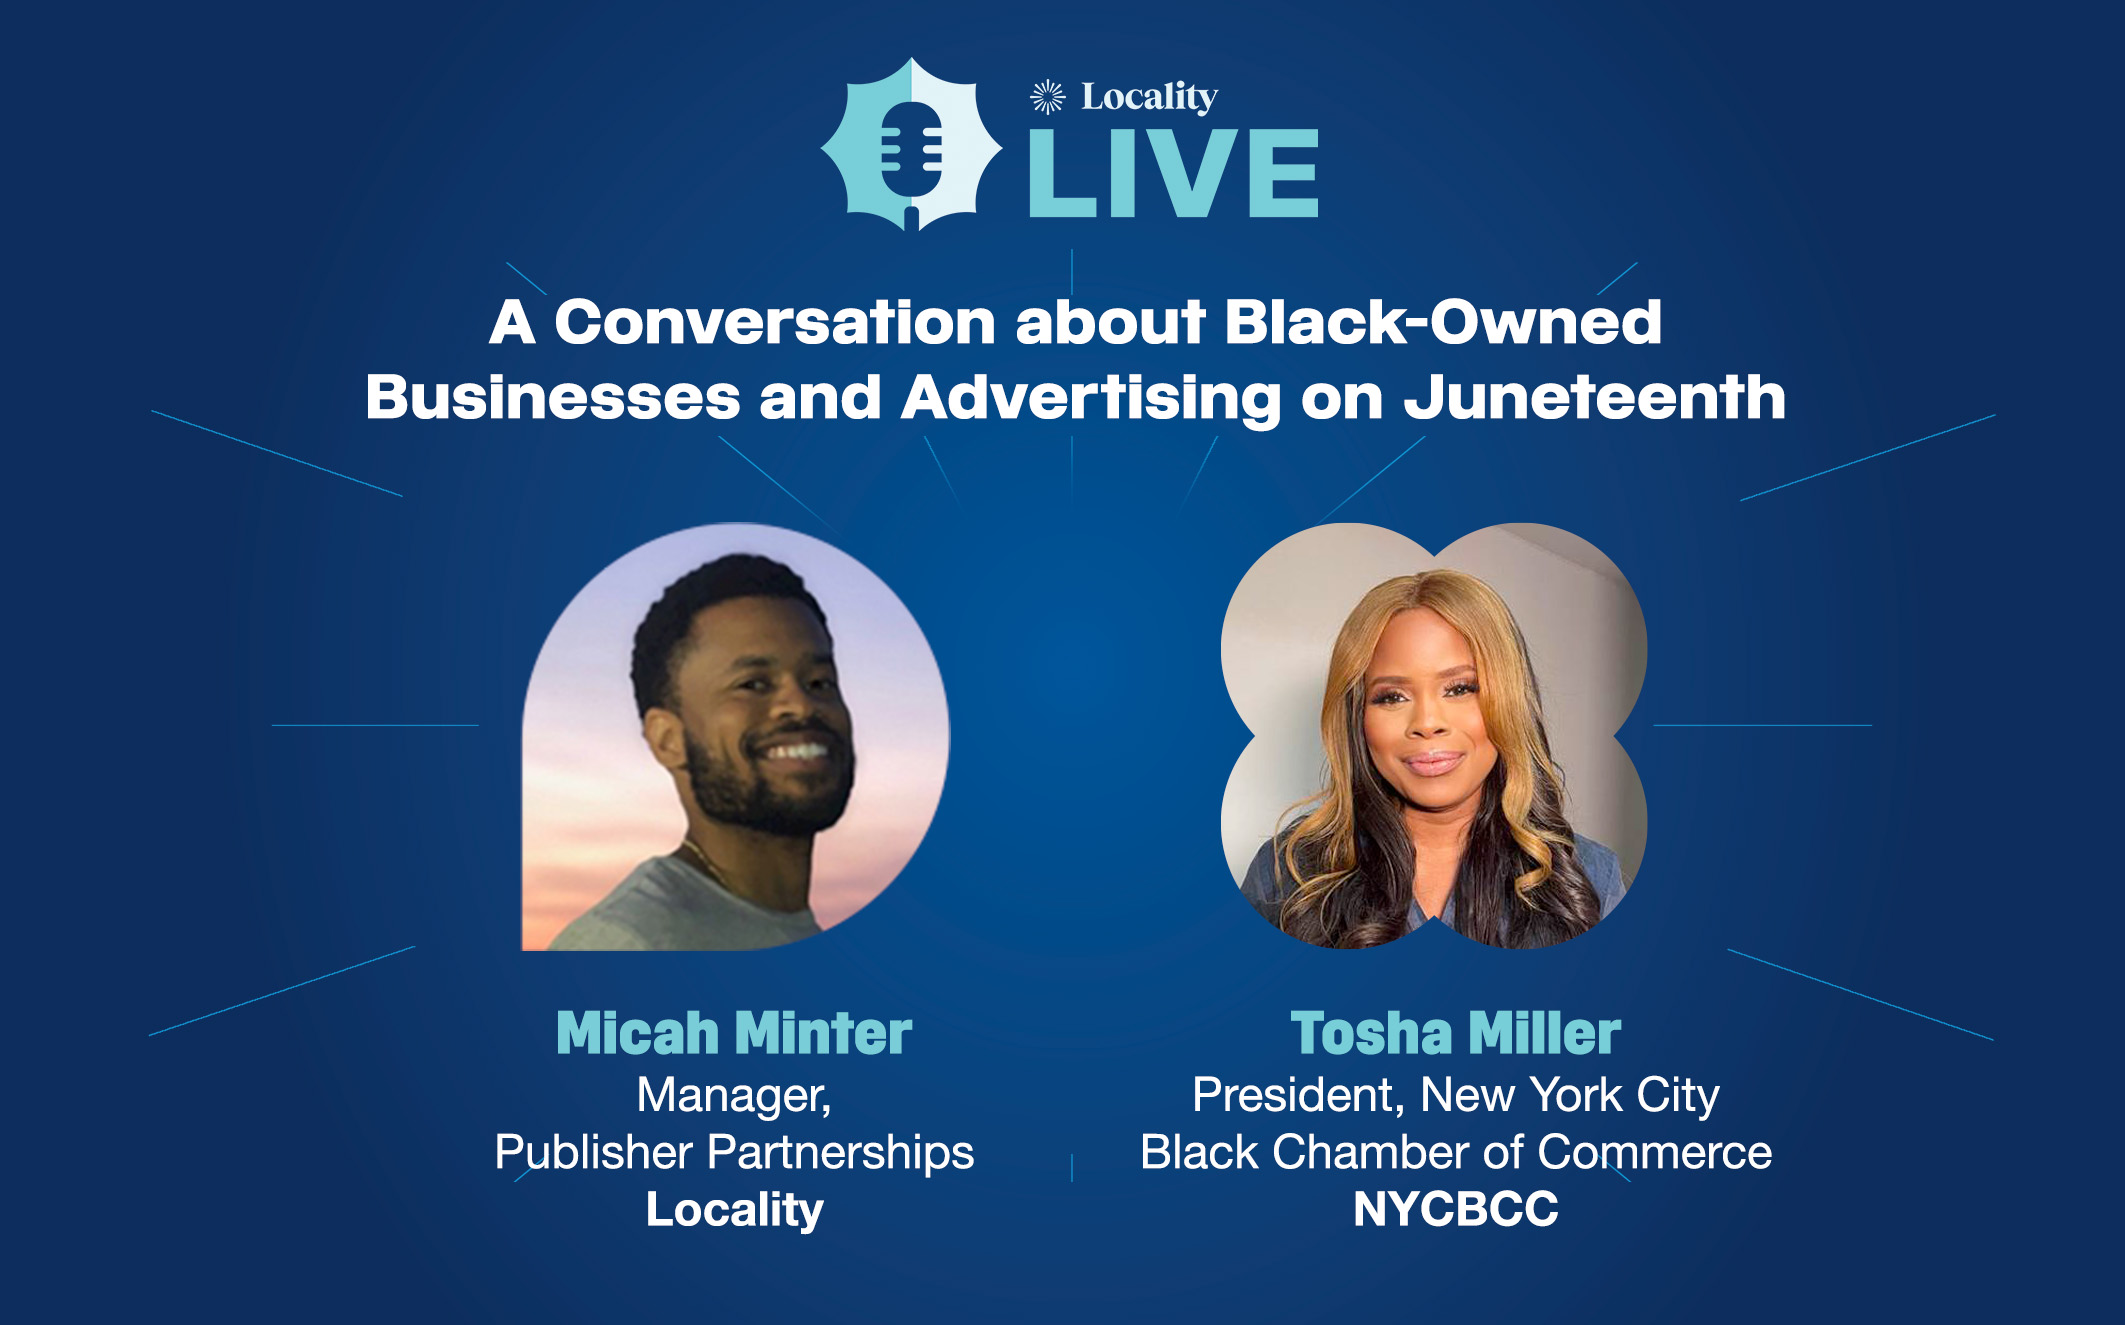 Promoting Black-Owned Businesses: Insights from Tosha Miller of NYCBCC at Locality LIVE